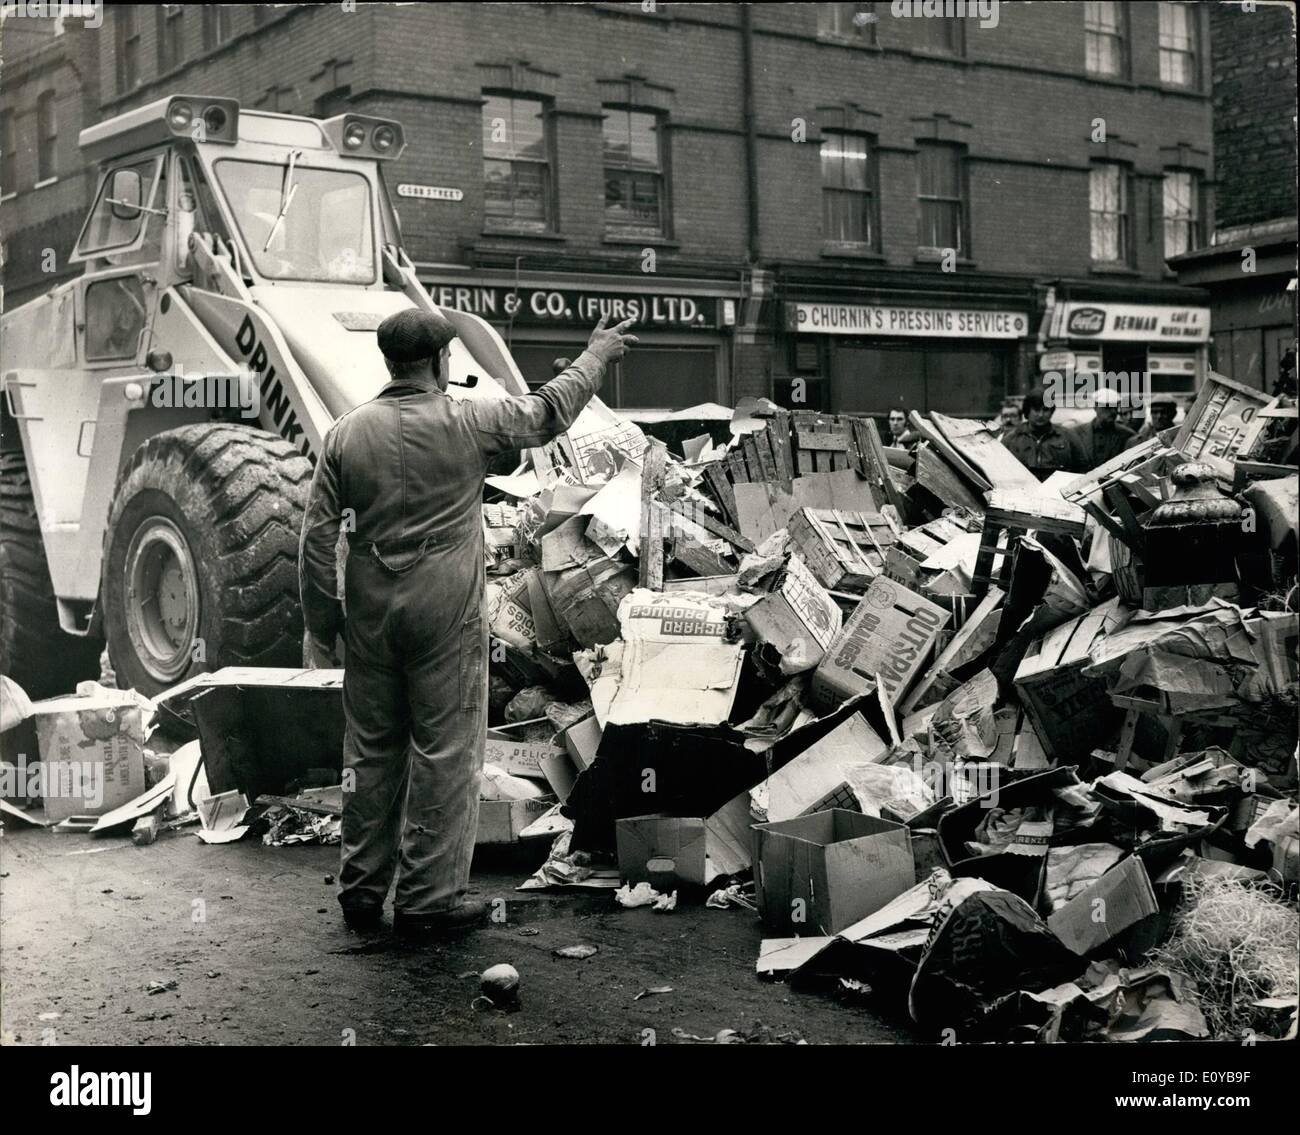 Oct. 10, 1969 - 5th October 1969 Dustmens' strike: Contractors move in in Stepney. Private contractors were today called in to remove the piles of rubbish blocking Leyden Street, Stepney. The Council's Public Cleansing Committee called in the private contractors after the Medical officer of Health confirmed that the rubbish was a danger to health. National talks on the strike will take place in Edinburgh on Thursday, if no agreement is reached, union leaders have threatened to give official backing to the stoppage, which has affected 21 London boroughs Stock Photo